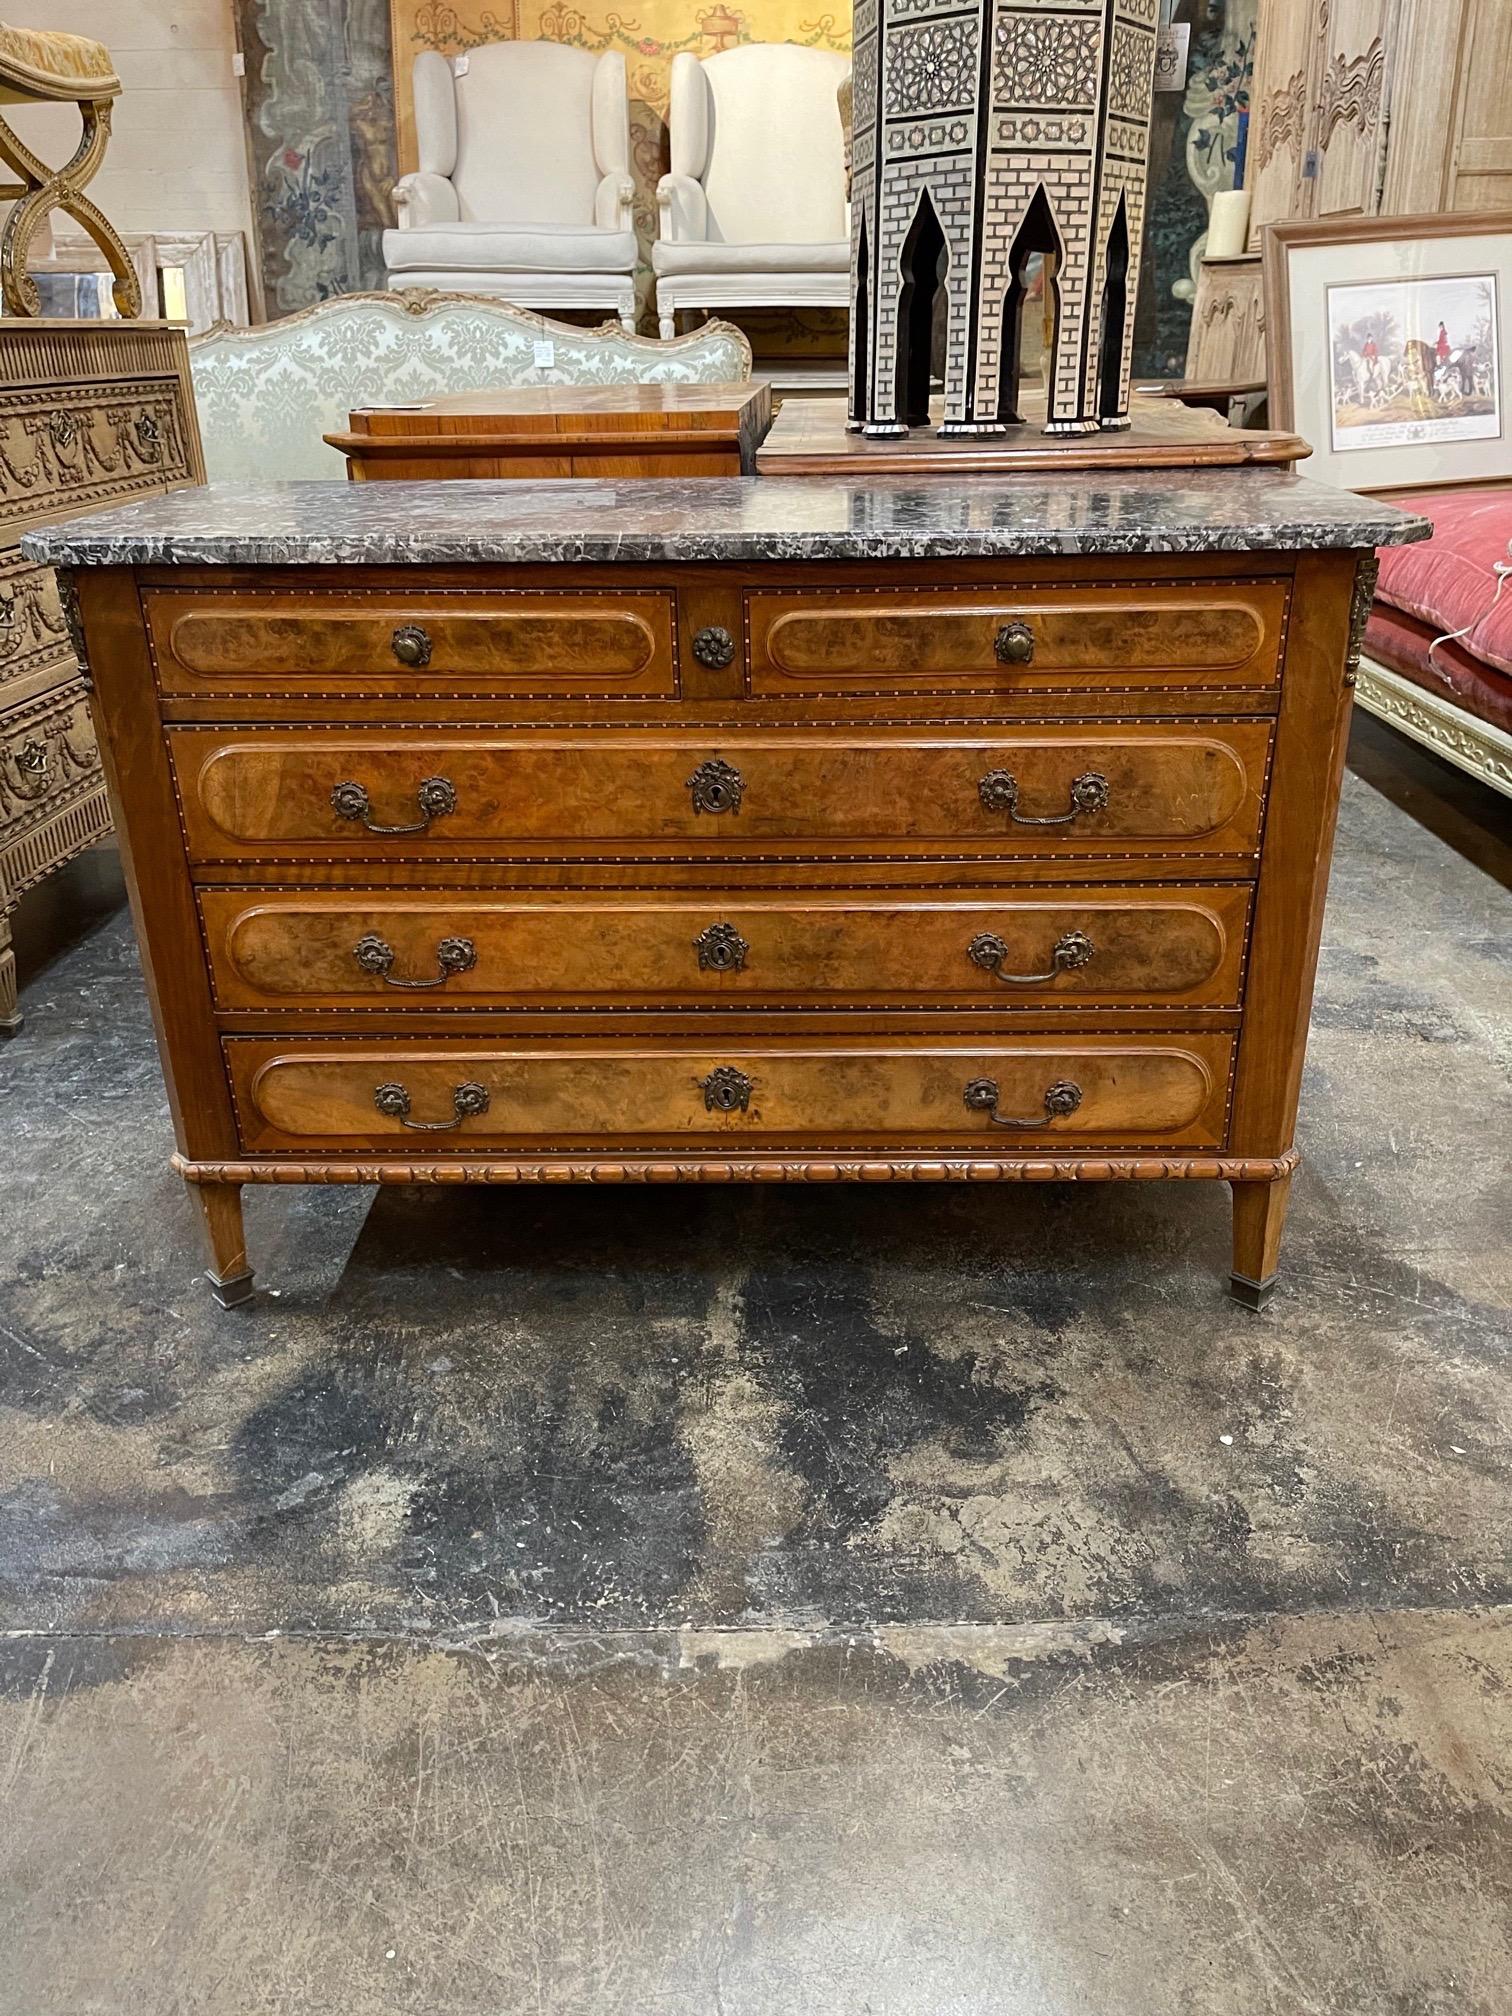 Handsome 19th century French burl walnut commode with inlaid pattern on the doors. The piece also has the original grey marble top and ample storage. Very fine quality!